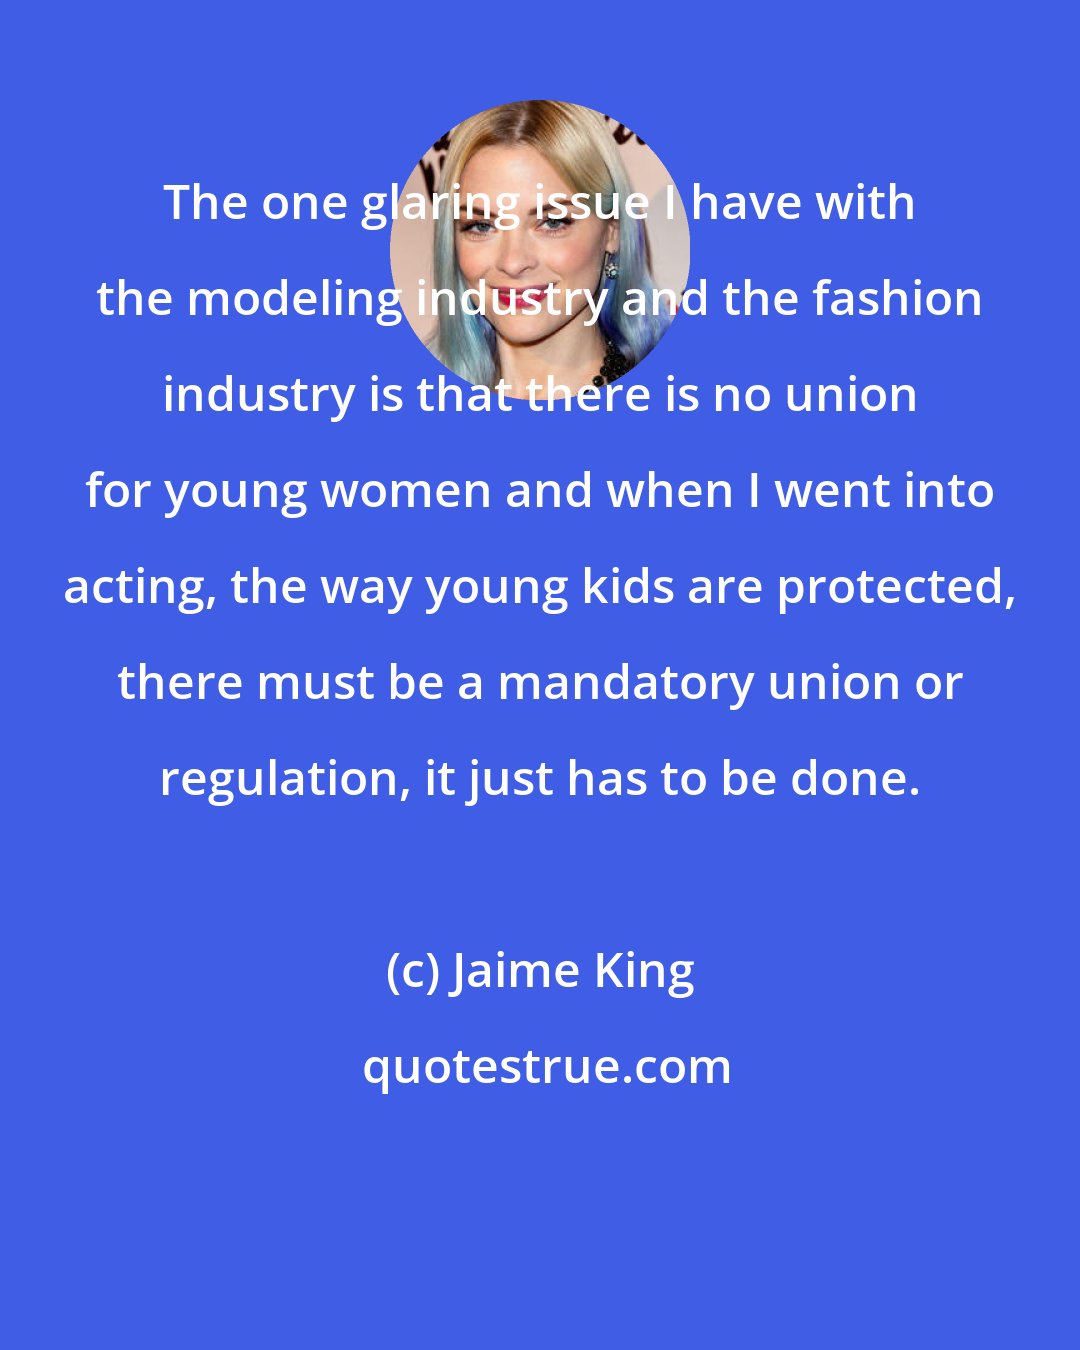 Jaime King: The one glaring issue I have with the modeling industry and the fashion industry is that there is no union for young women and when I went into acting, the way young kids are protected, there must be a mandatory union or regulation, it just has to be done.